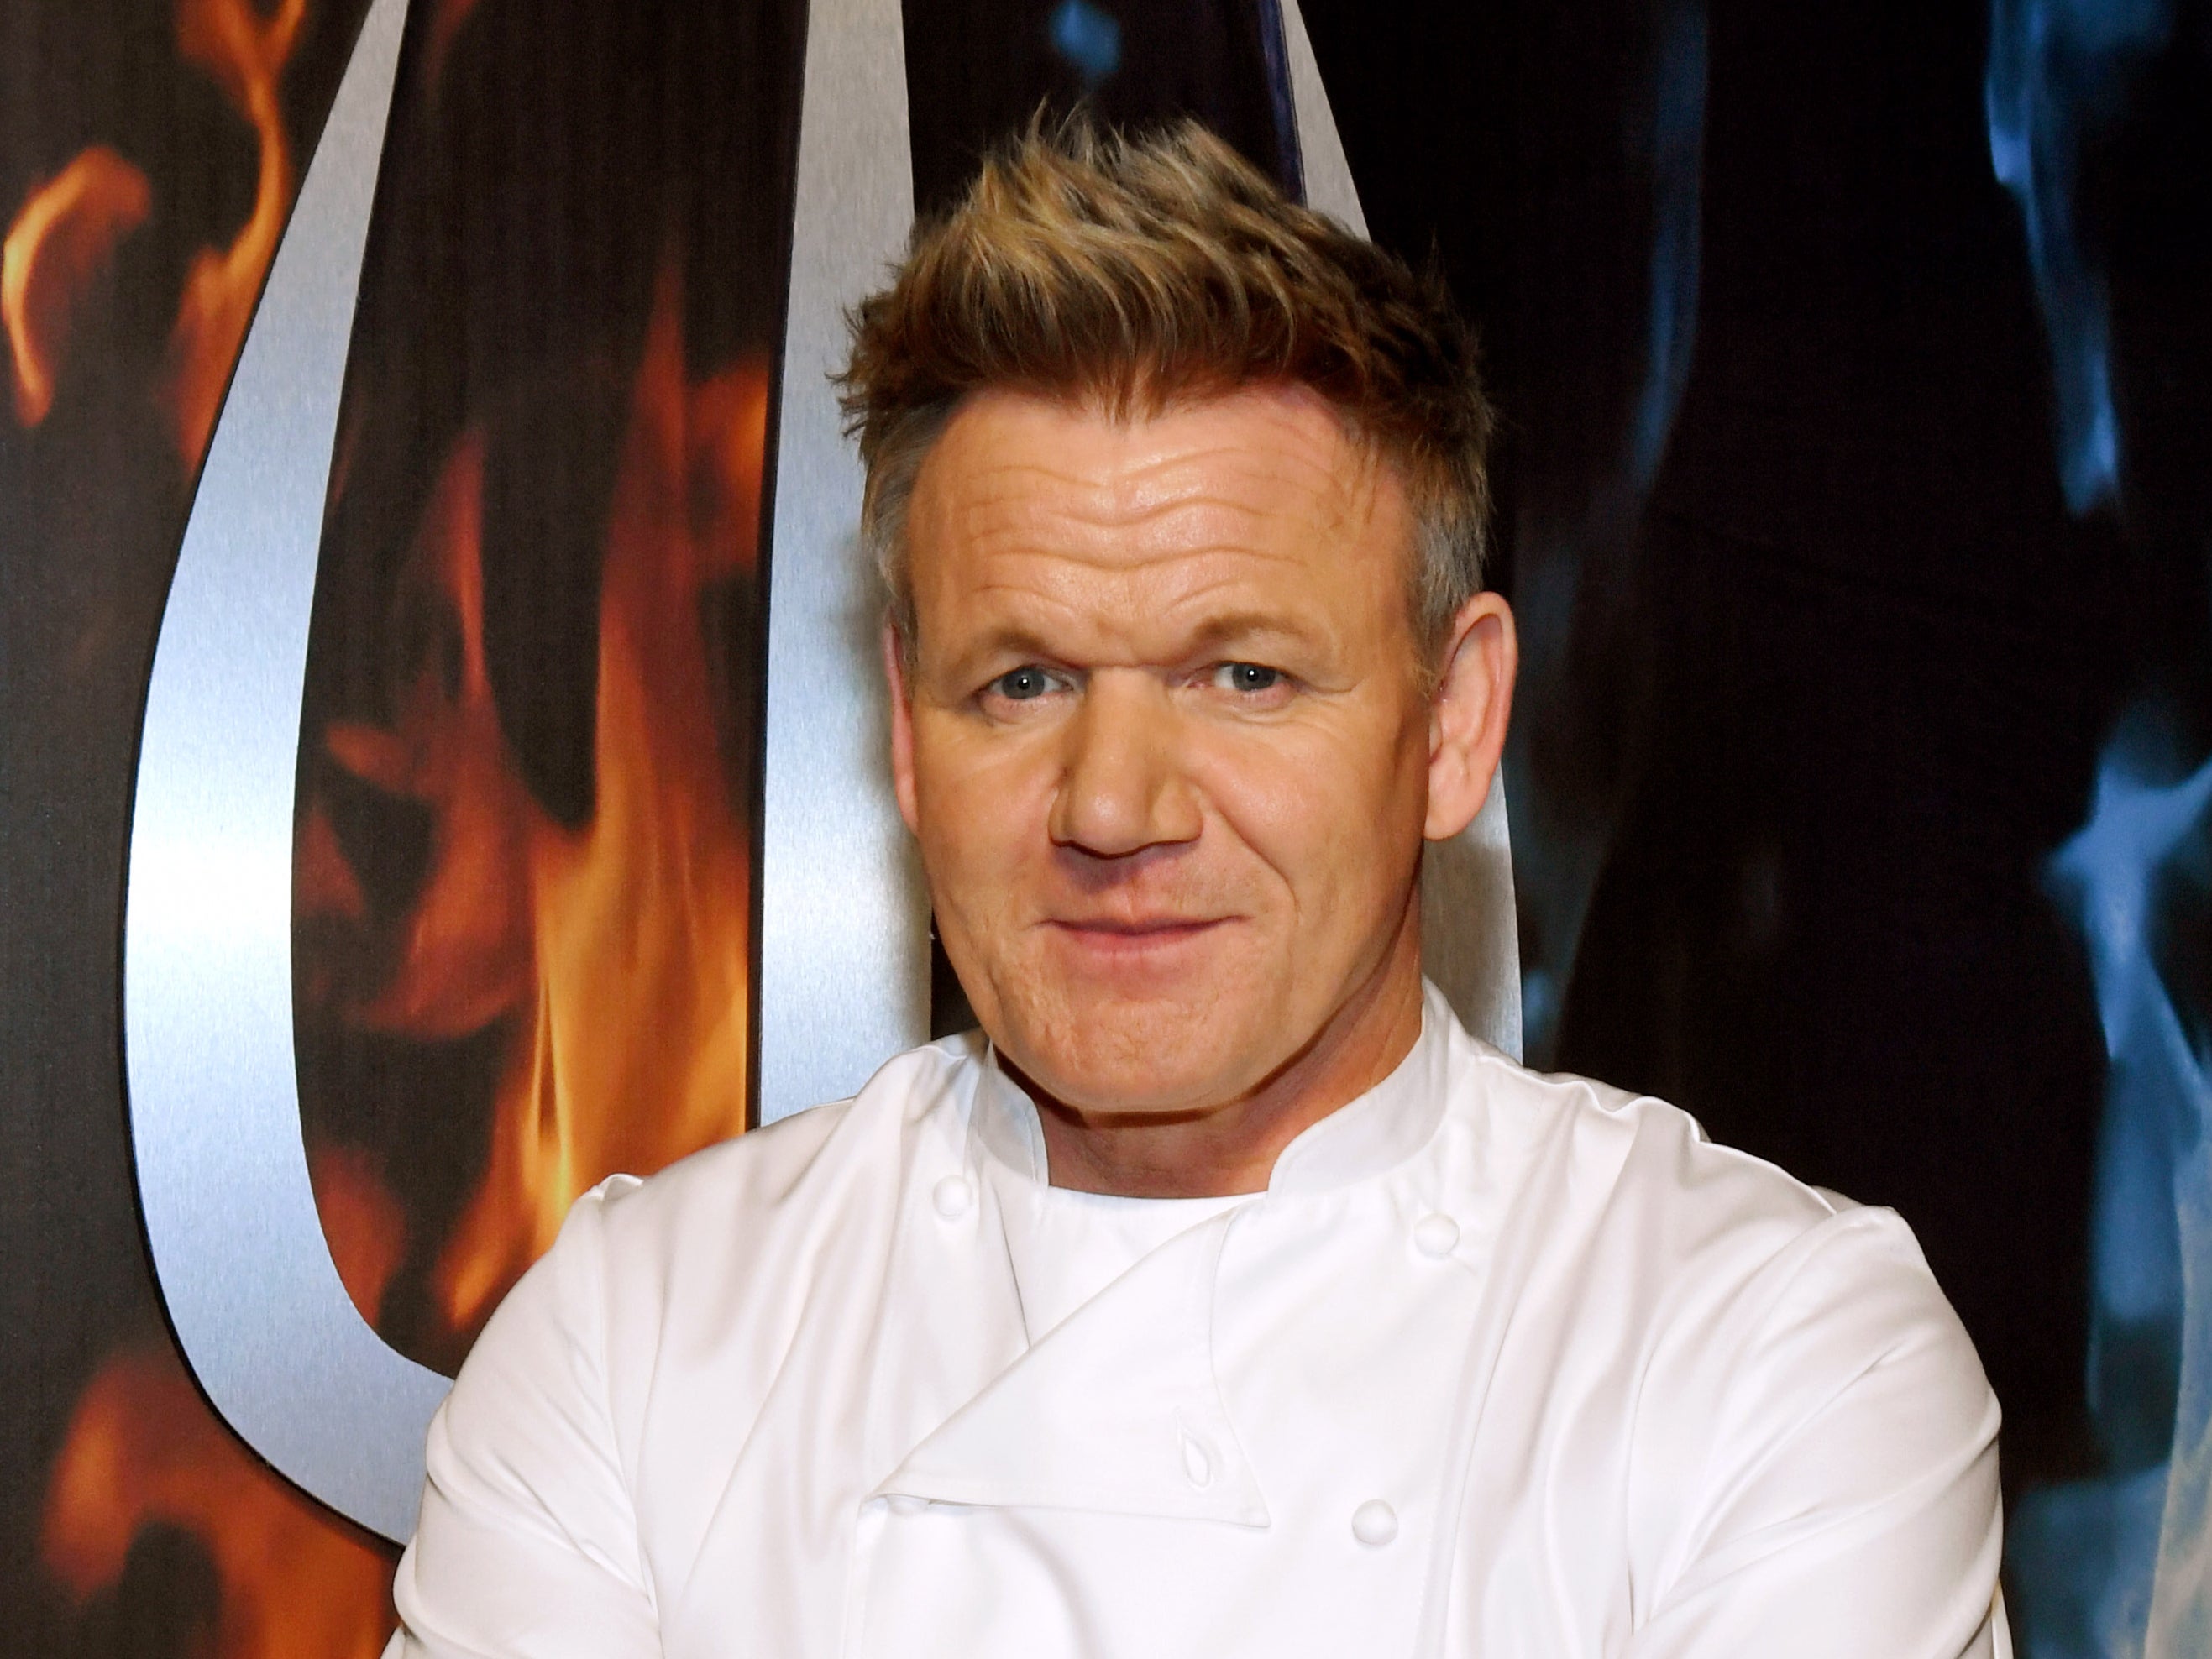 Gordon Ramsay has yet to comment after one of his properties was taken over